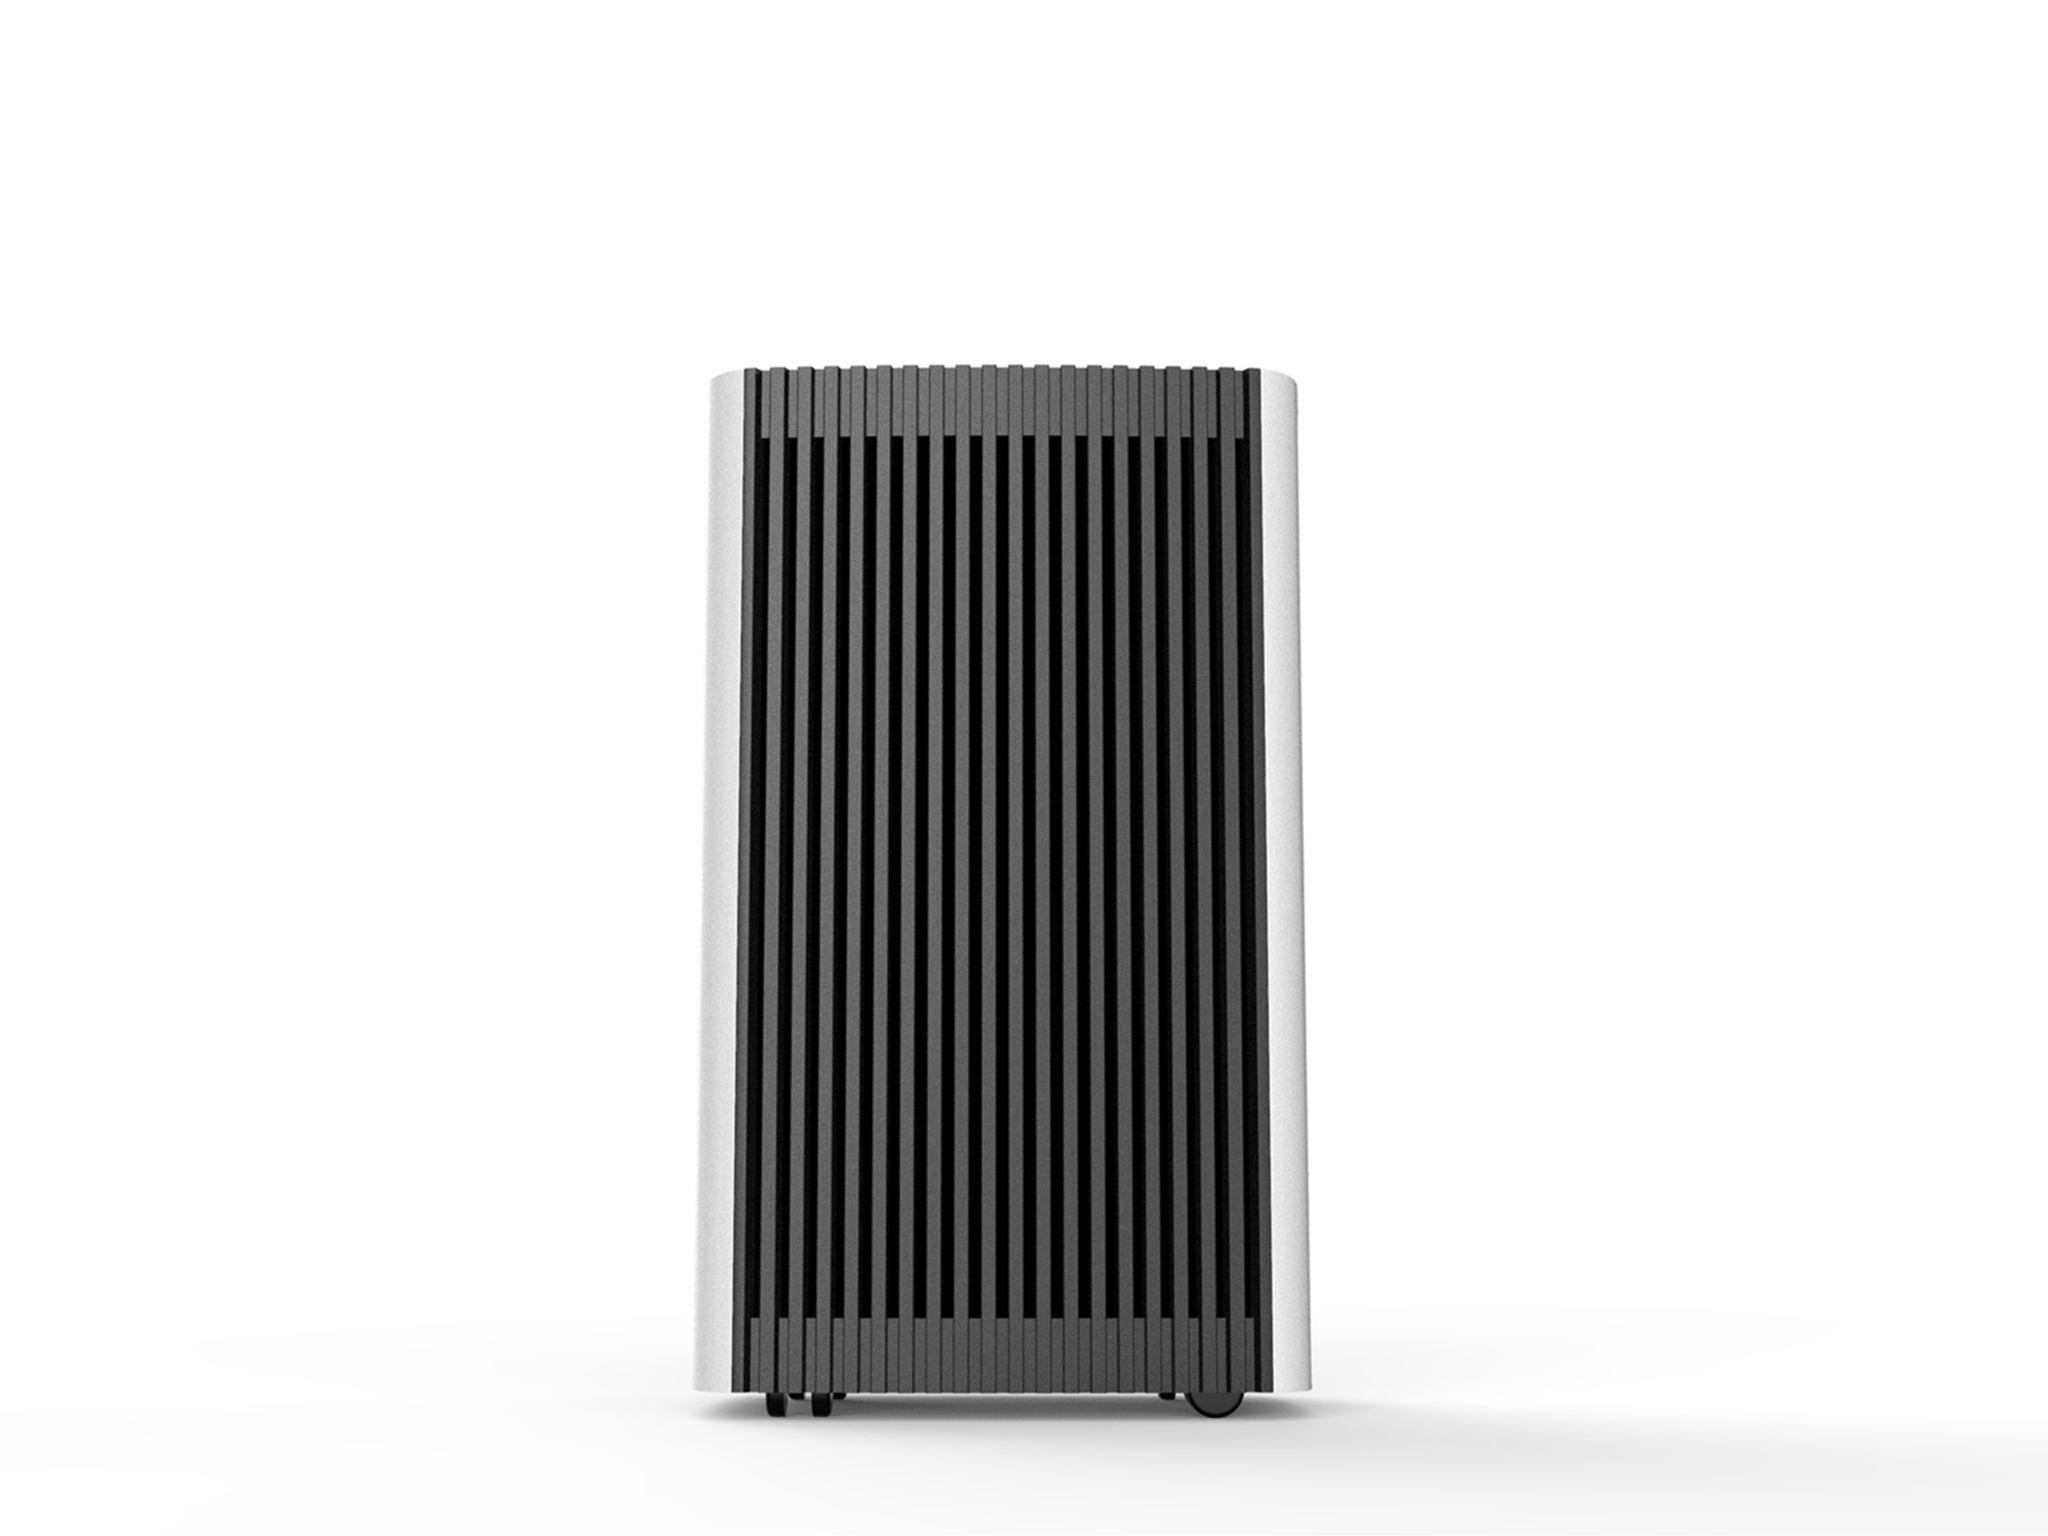 A full-automatic intelligent COVID-19 air purifier